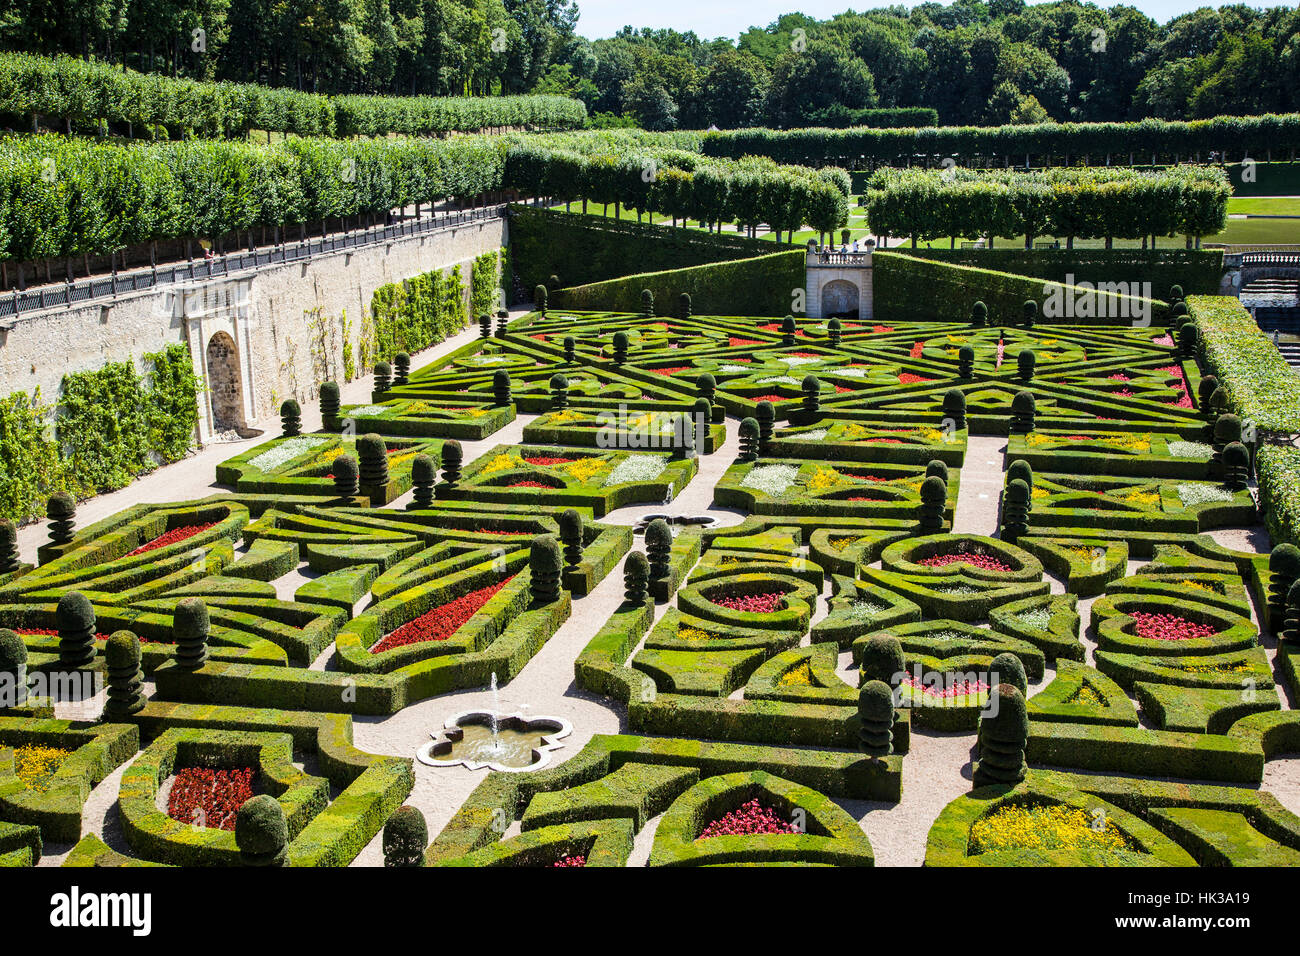 Traditional French garden in Chateau de Villandry. Chateau de Villandry (castle-palace) - world known for its amazing gardens. Stock Photo